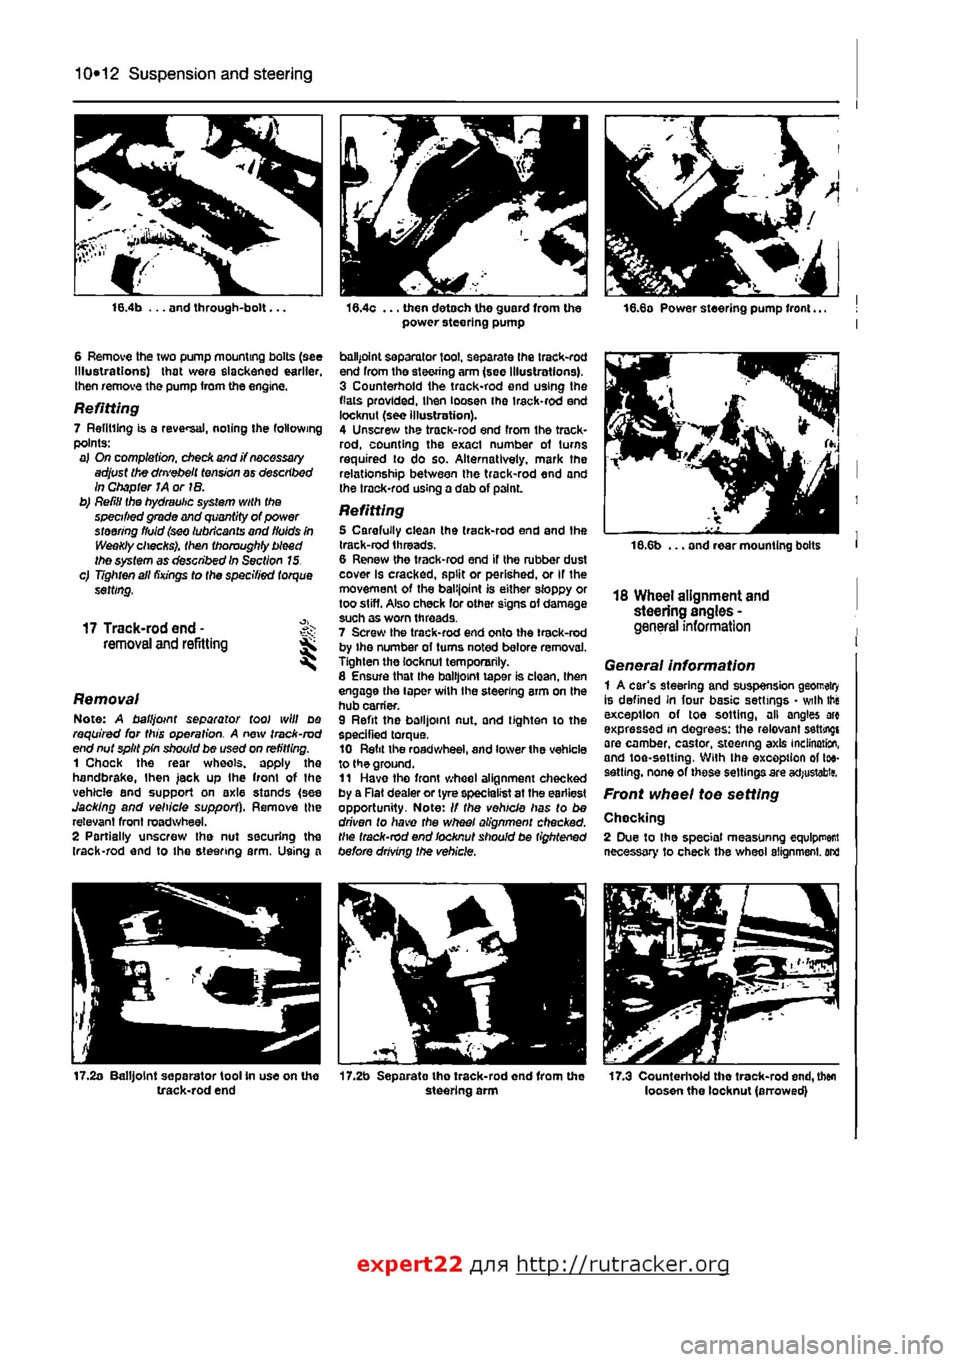 FIAT PUNTO 1995 176 / 1.G Manual PDF 
10*12 Suspension and steering 
16.4b ... and through-bolt... 
6 Remove the two pump mounting bolts (see Illustrations) that were slackened earlier, then remove the pump from the engine. 
Refitting 7 